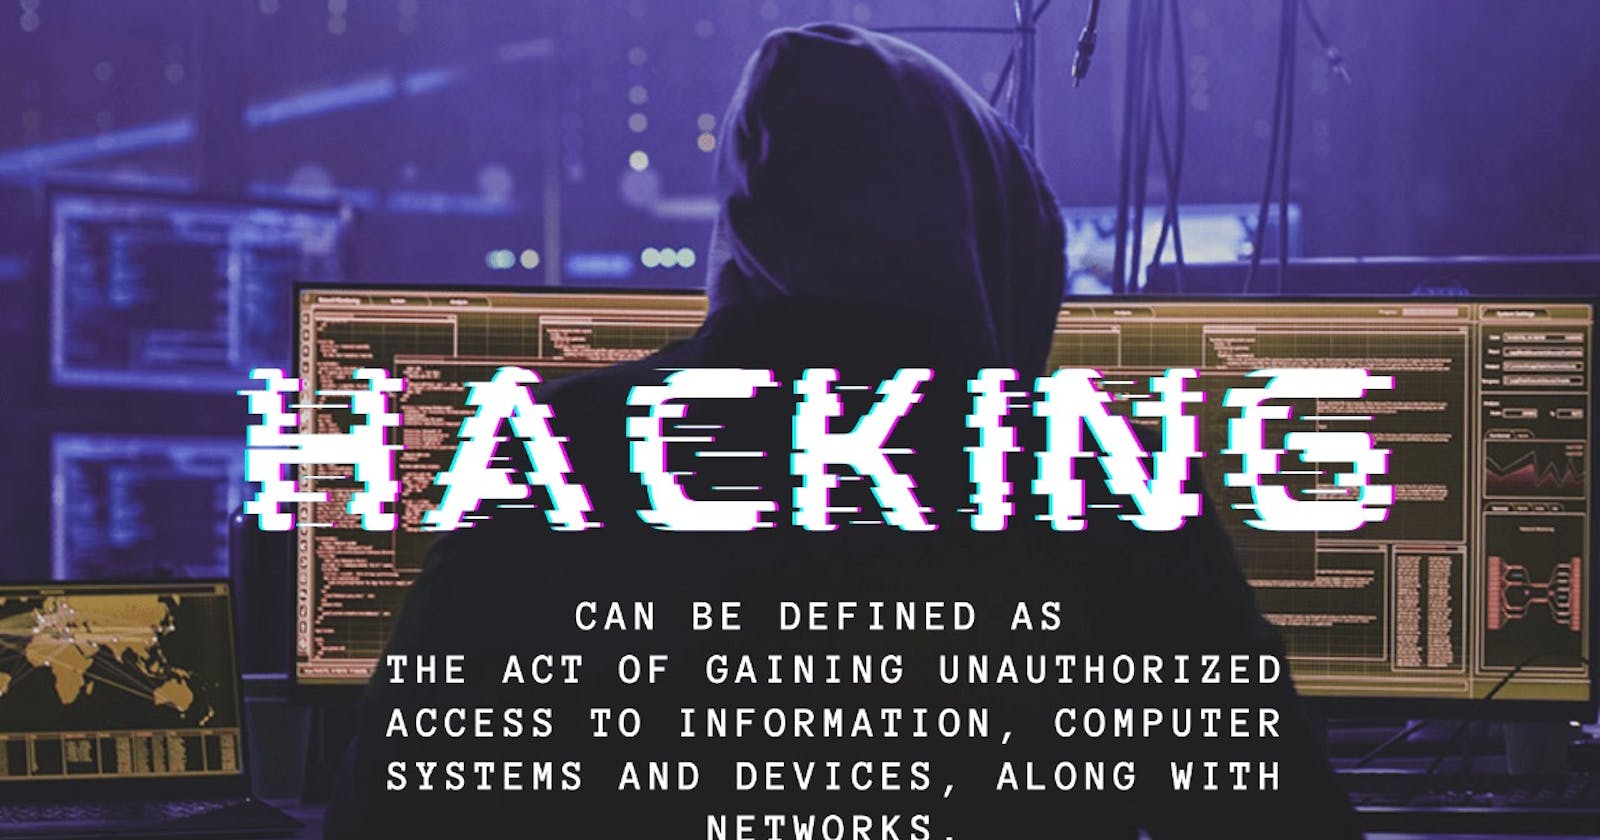 What is Hacking?